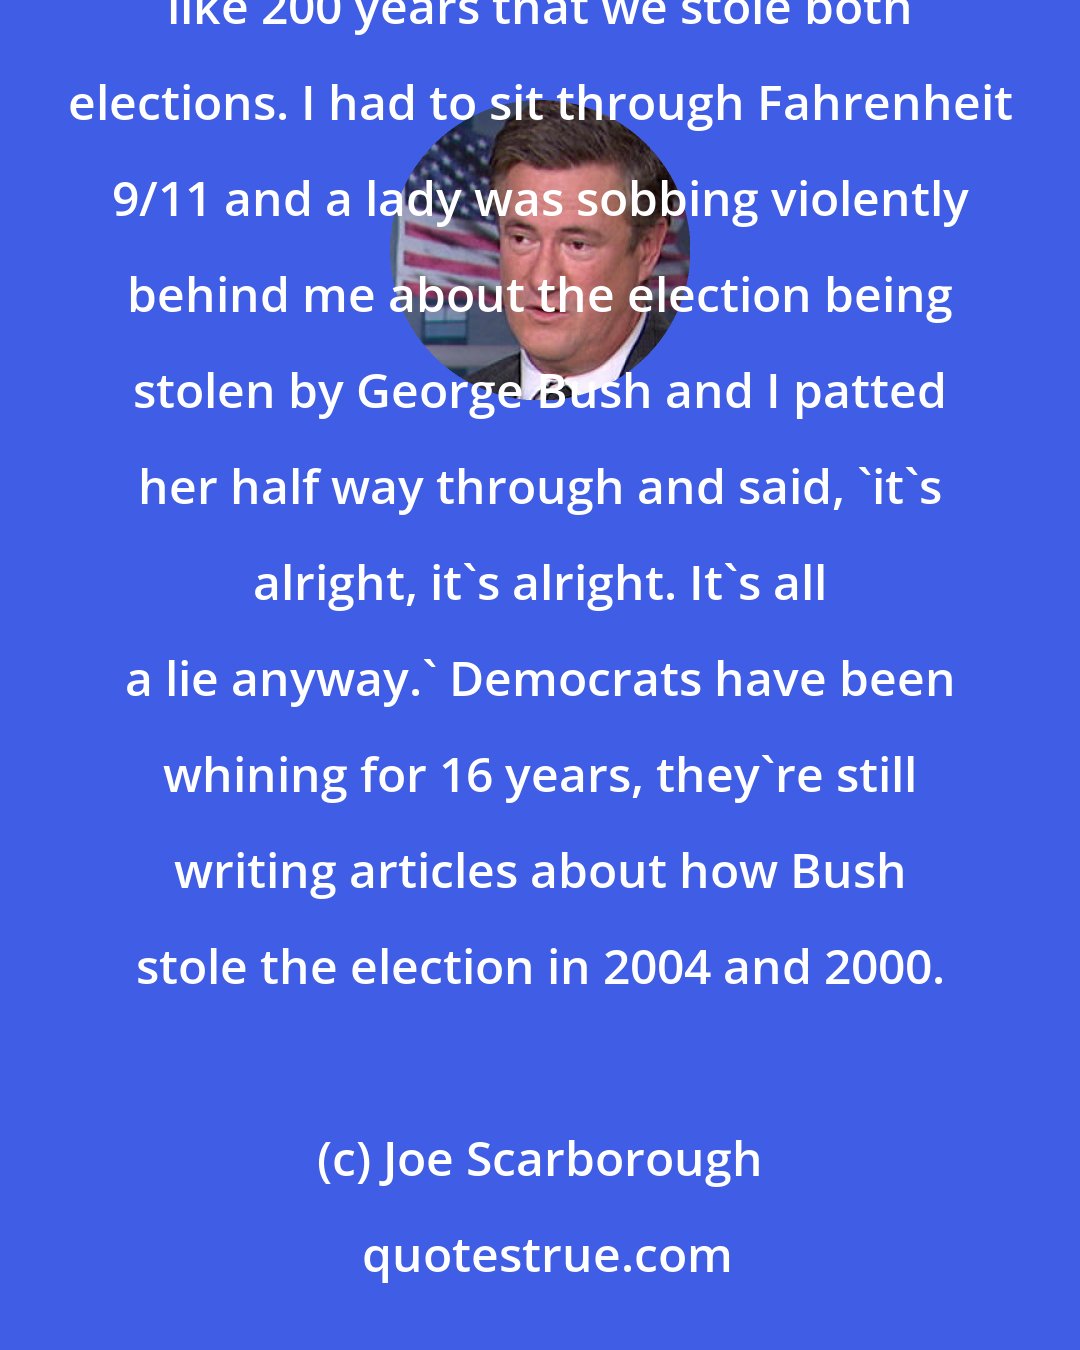 Joe Scarborough: As a Republican, I have listened to Democrats talk about the only two times we won the White House in like 200 years that we stole both elections. I had to sit through Fahrenheit 9/11 and a lady was sobbing violently behind me about the election being stolen by George Bush and I patted her half way through and said, 'it's alright, it's alright. It's all a lie anyway.' Democrats have been whining for 16 years, they're still writing articles about how Bush stole the election in 2004 and 2000.